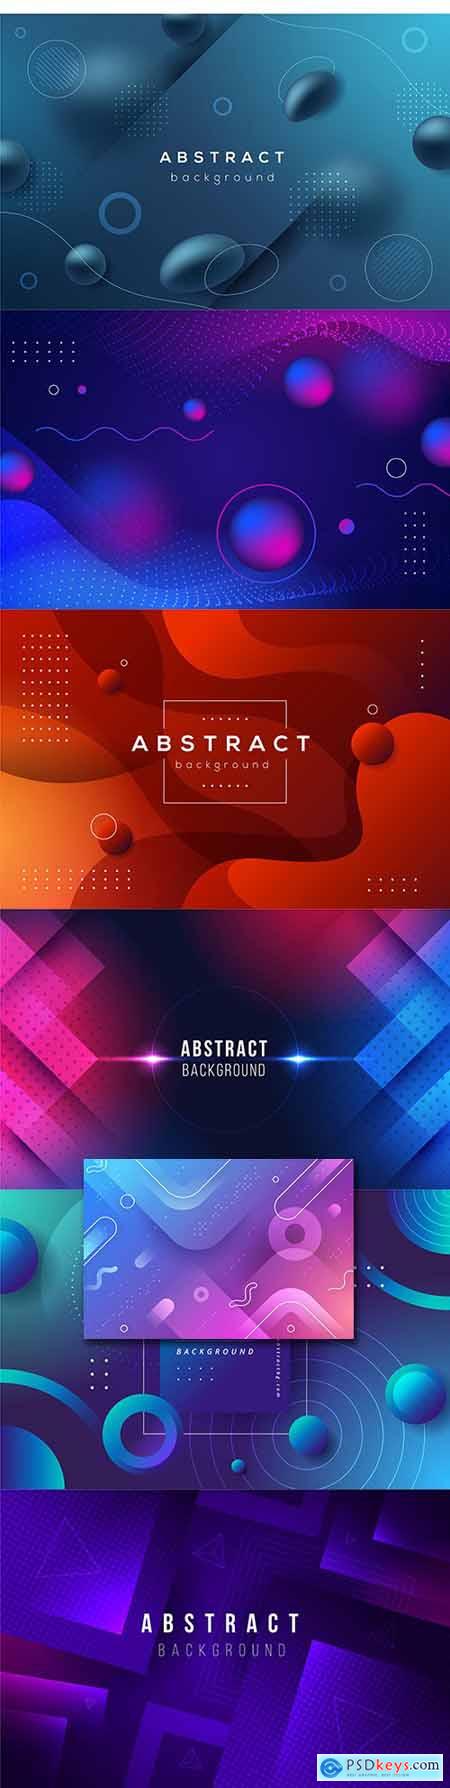 Gradient abstract design geometric background shape